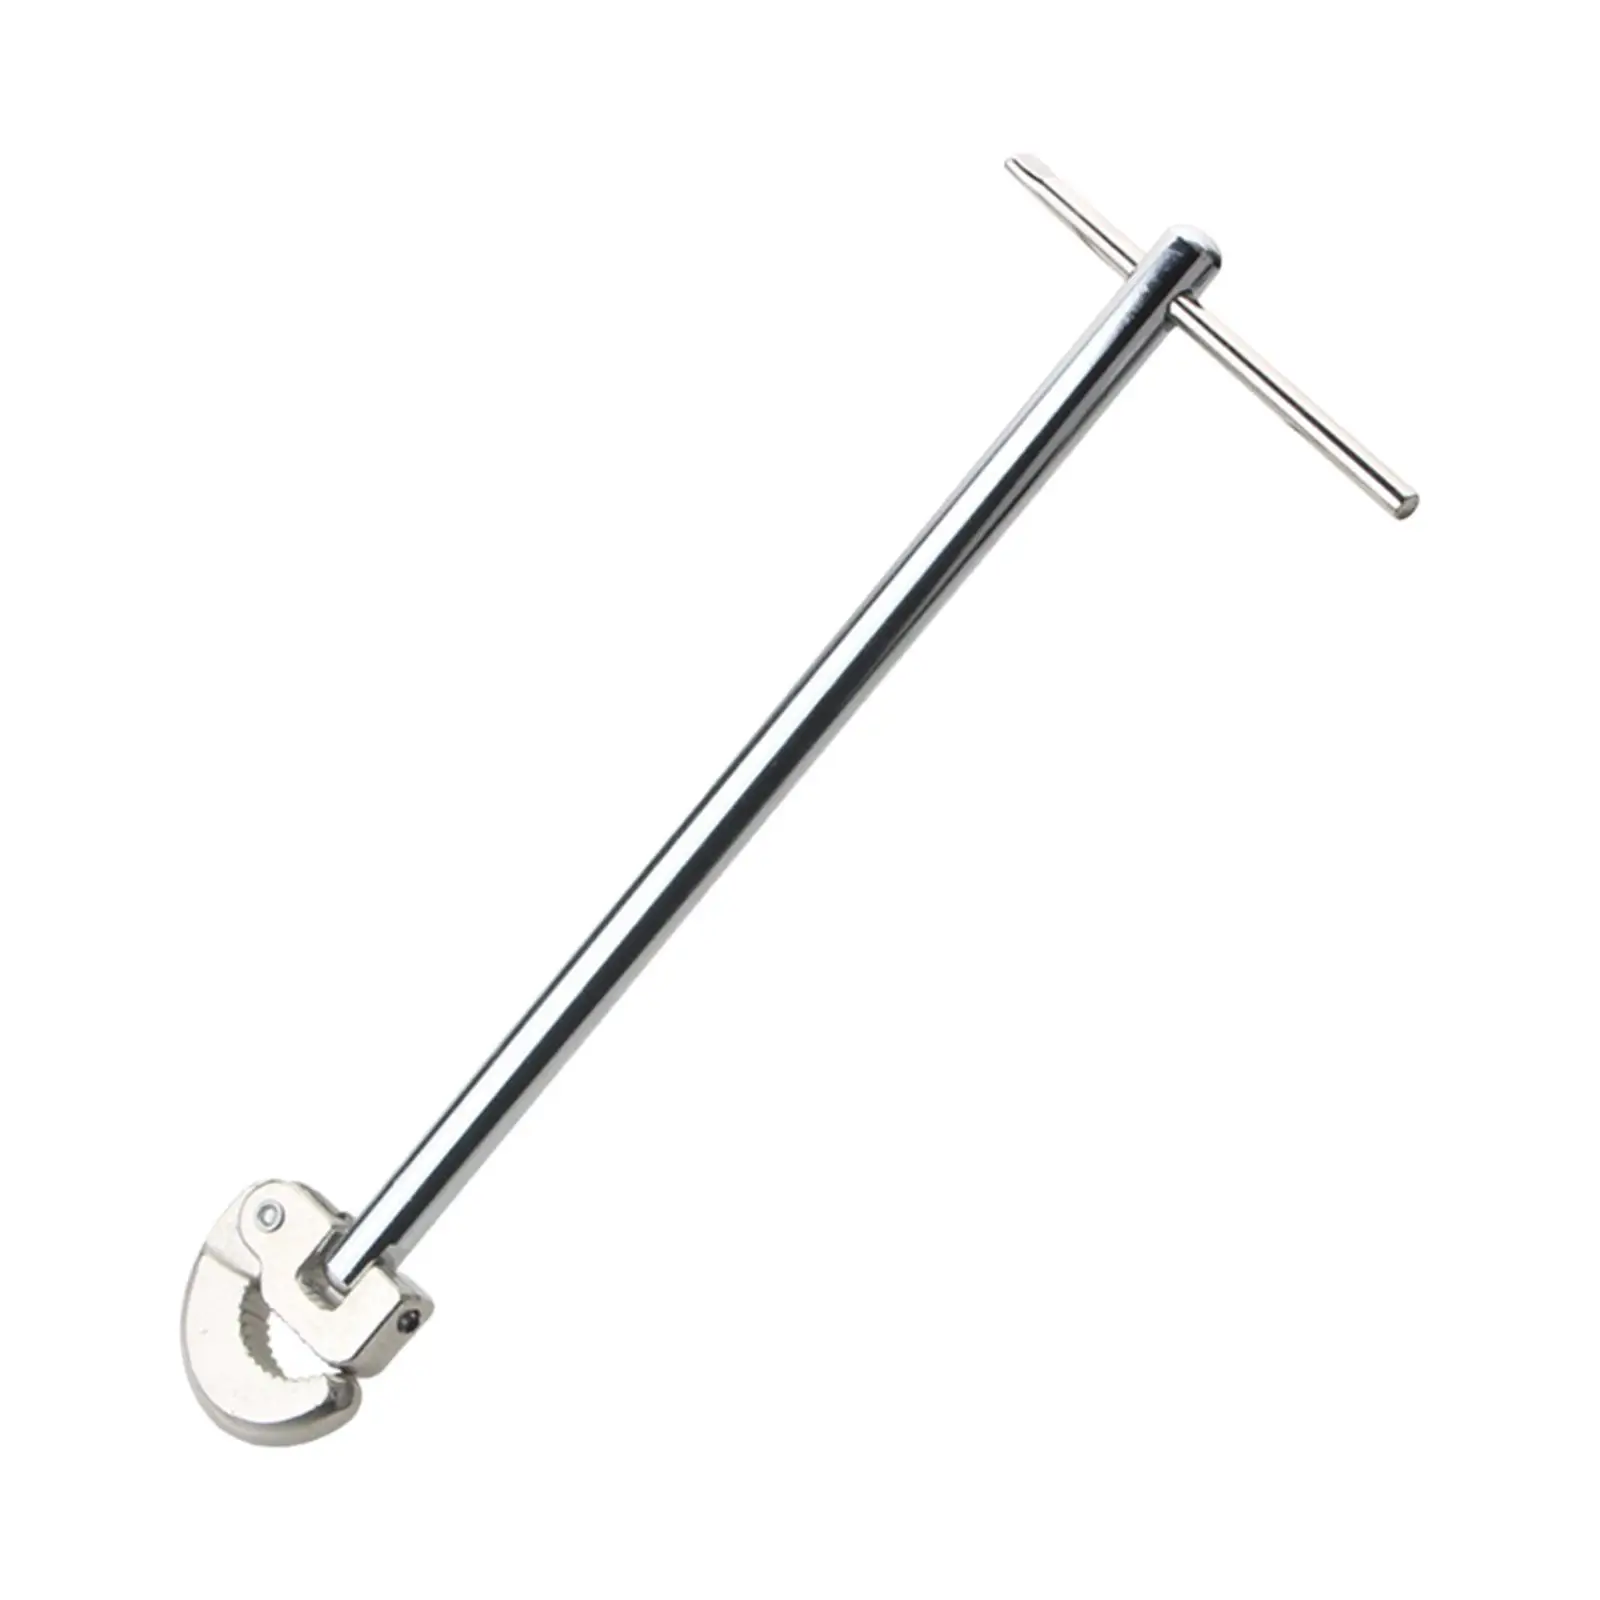 Portable 12in Basin Wrench Practical 180° Rotation for Bathroom Sink Kitchen